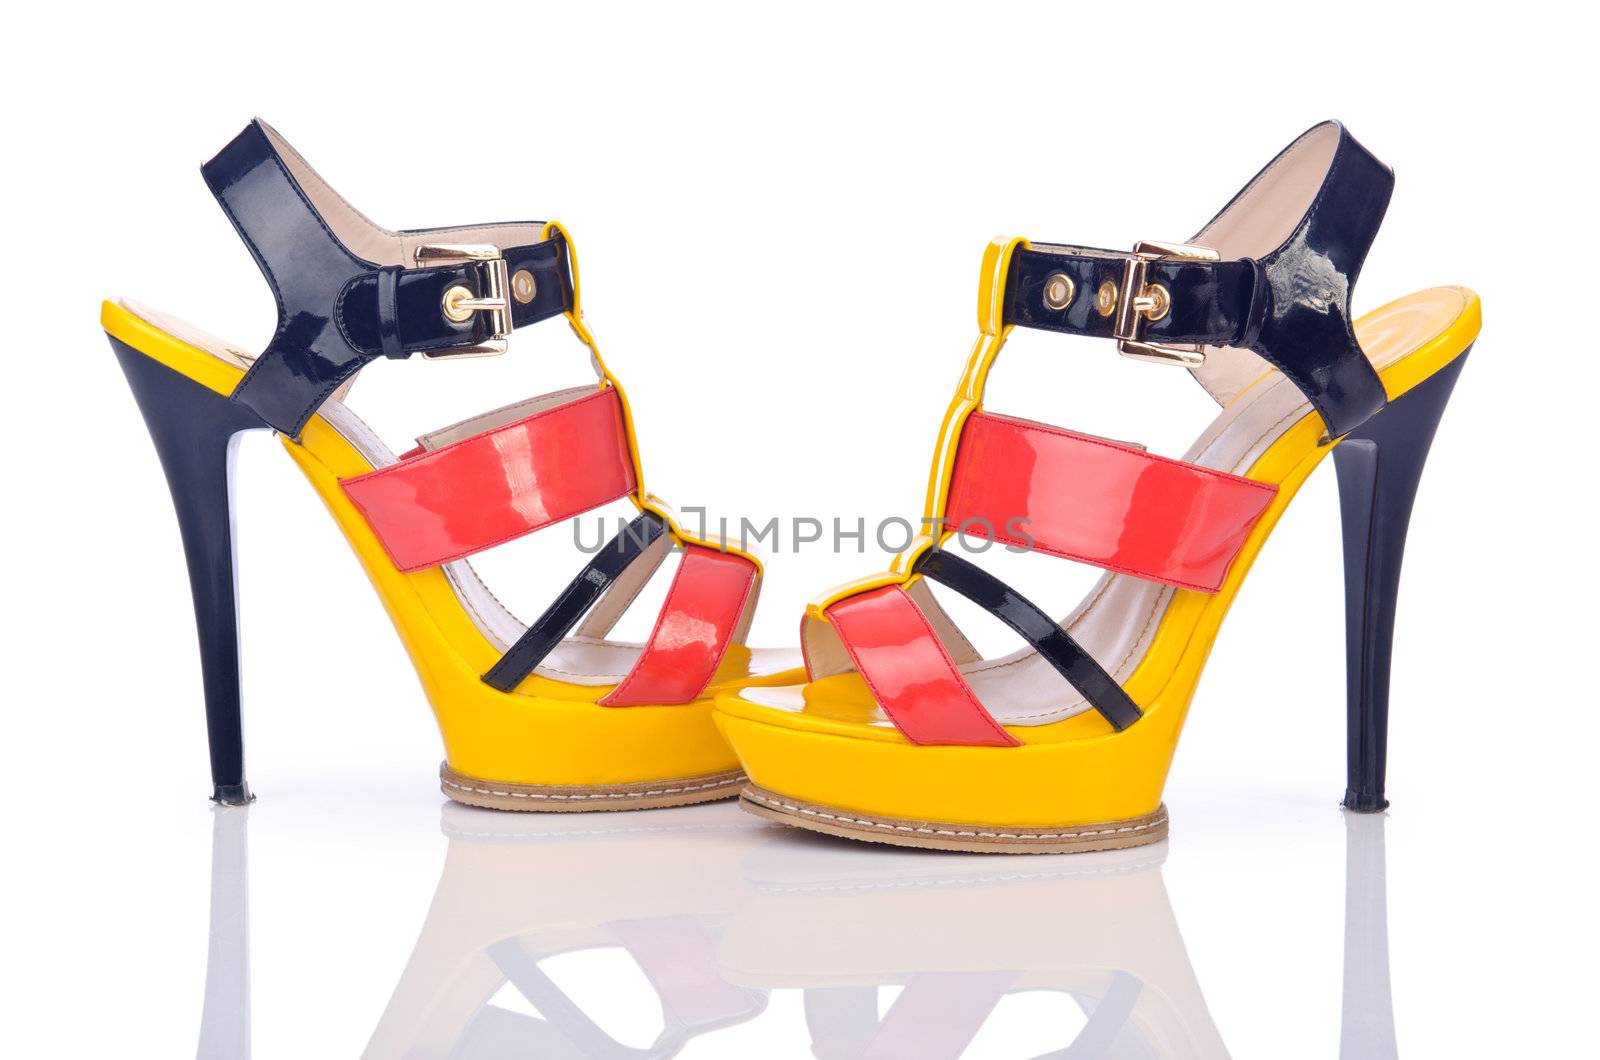 Shoes in fashion concept on white